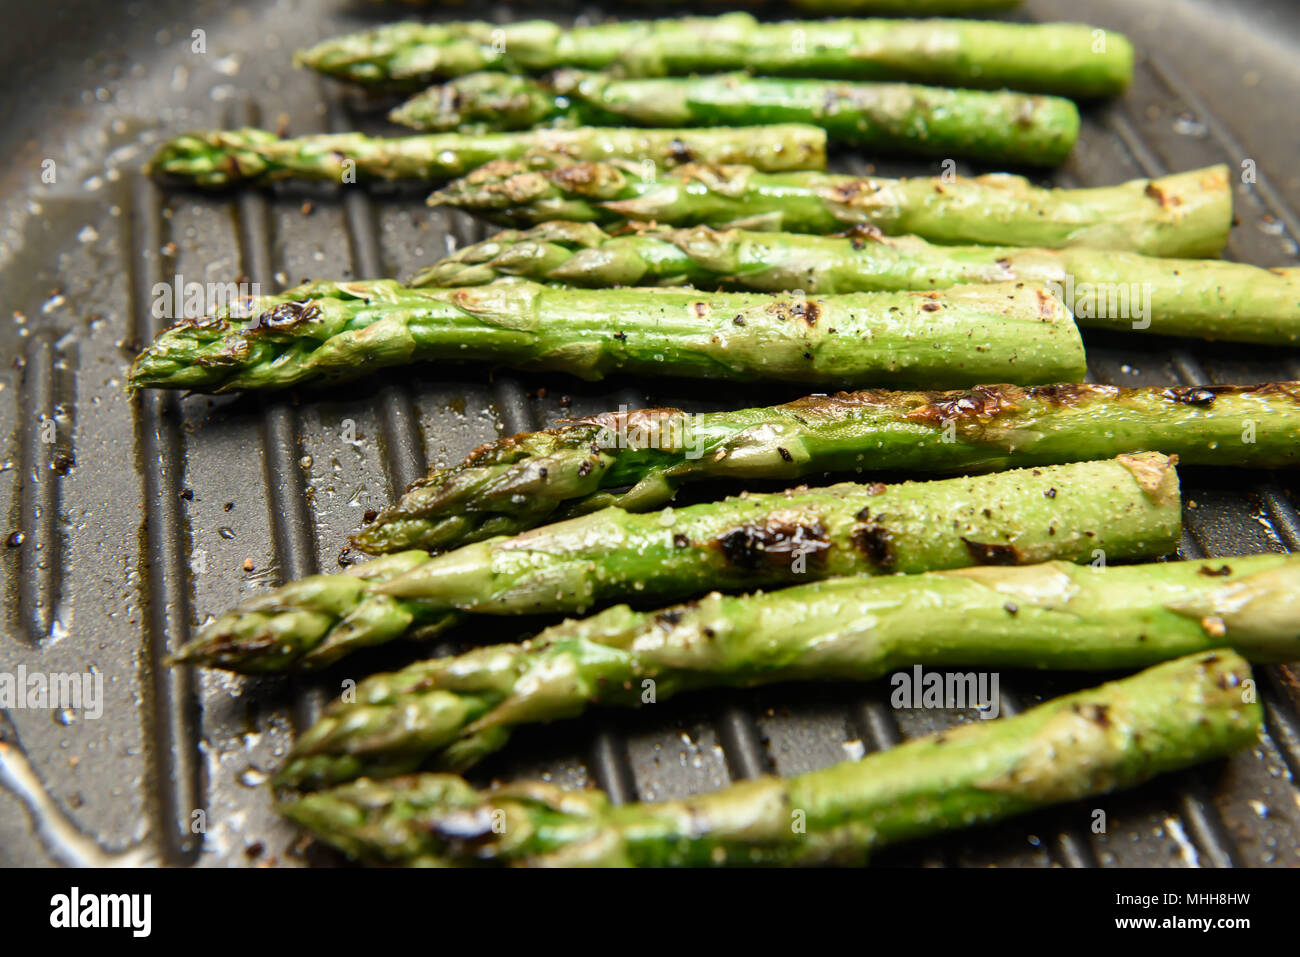 Fresh Asparagus Cooking On A Griddle Pan Stock Photo Alamy